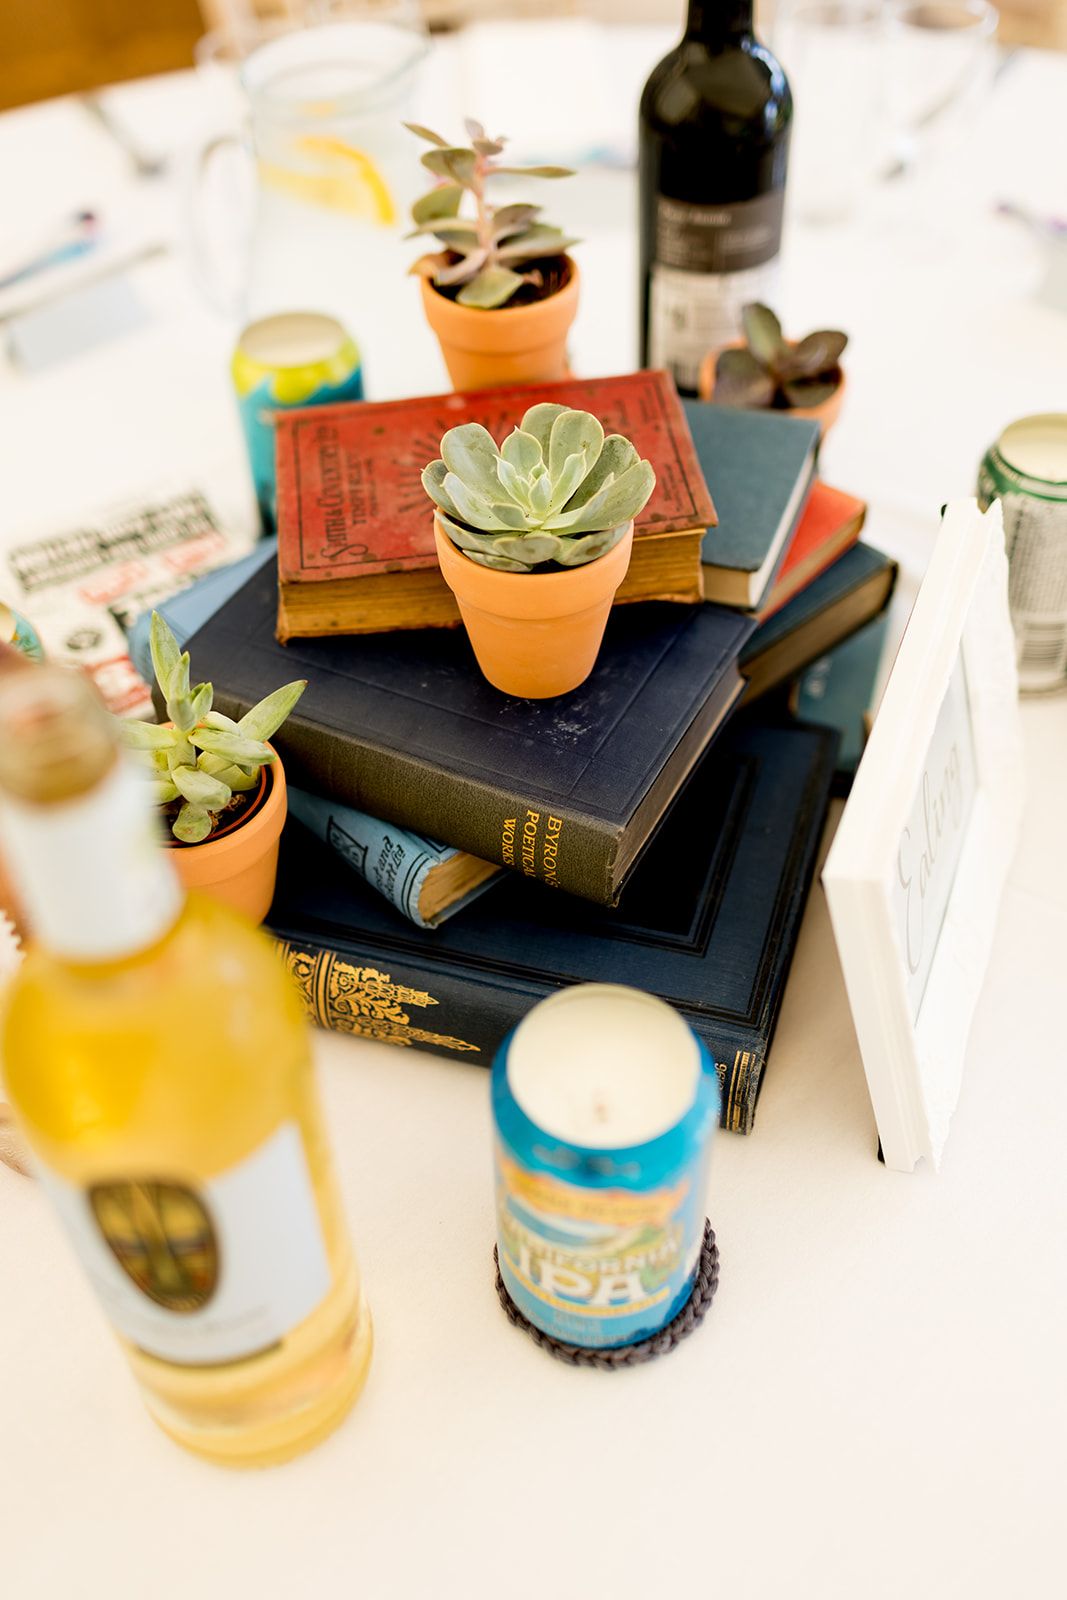 Amazing table centres arranged by the bride from vintage books and succulent plants